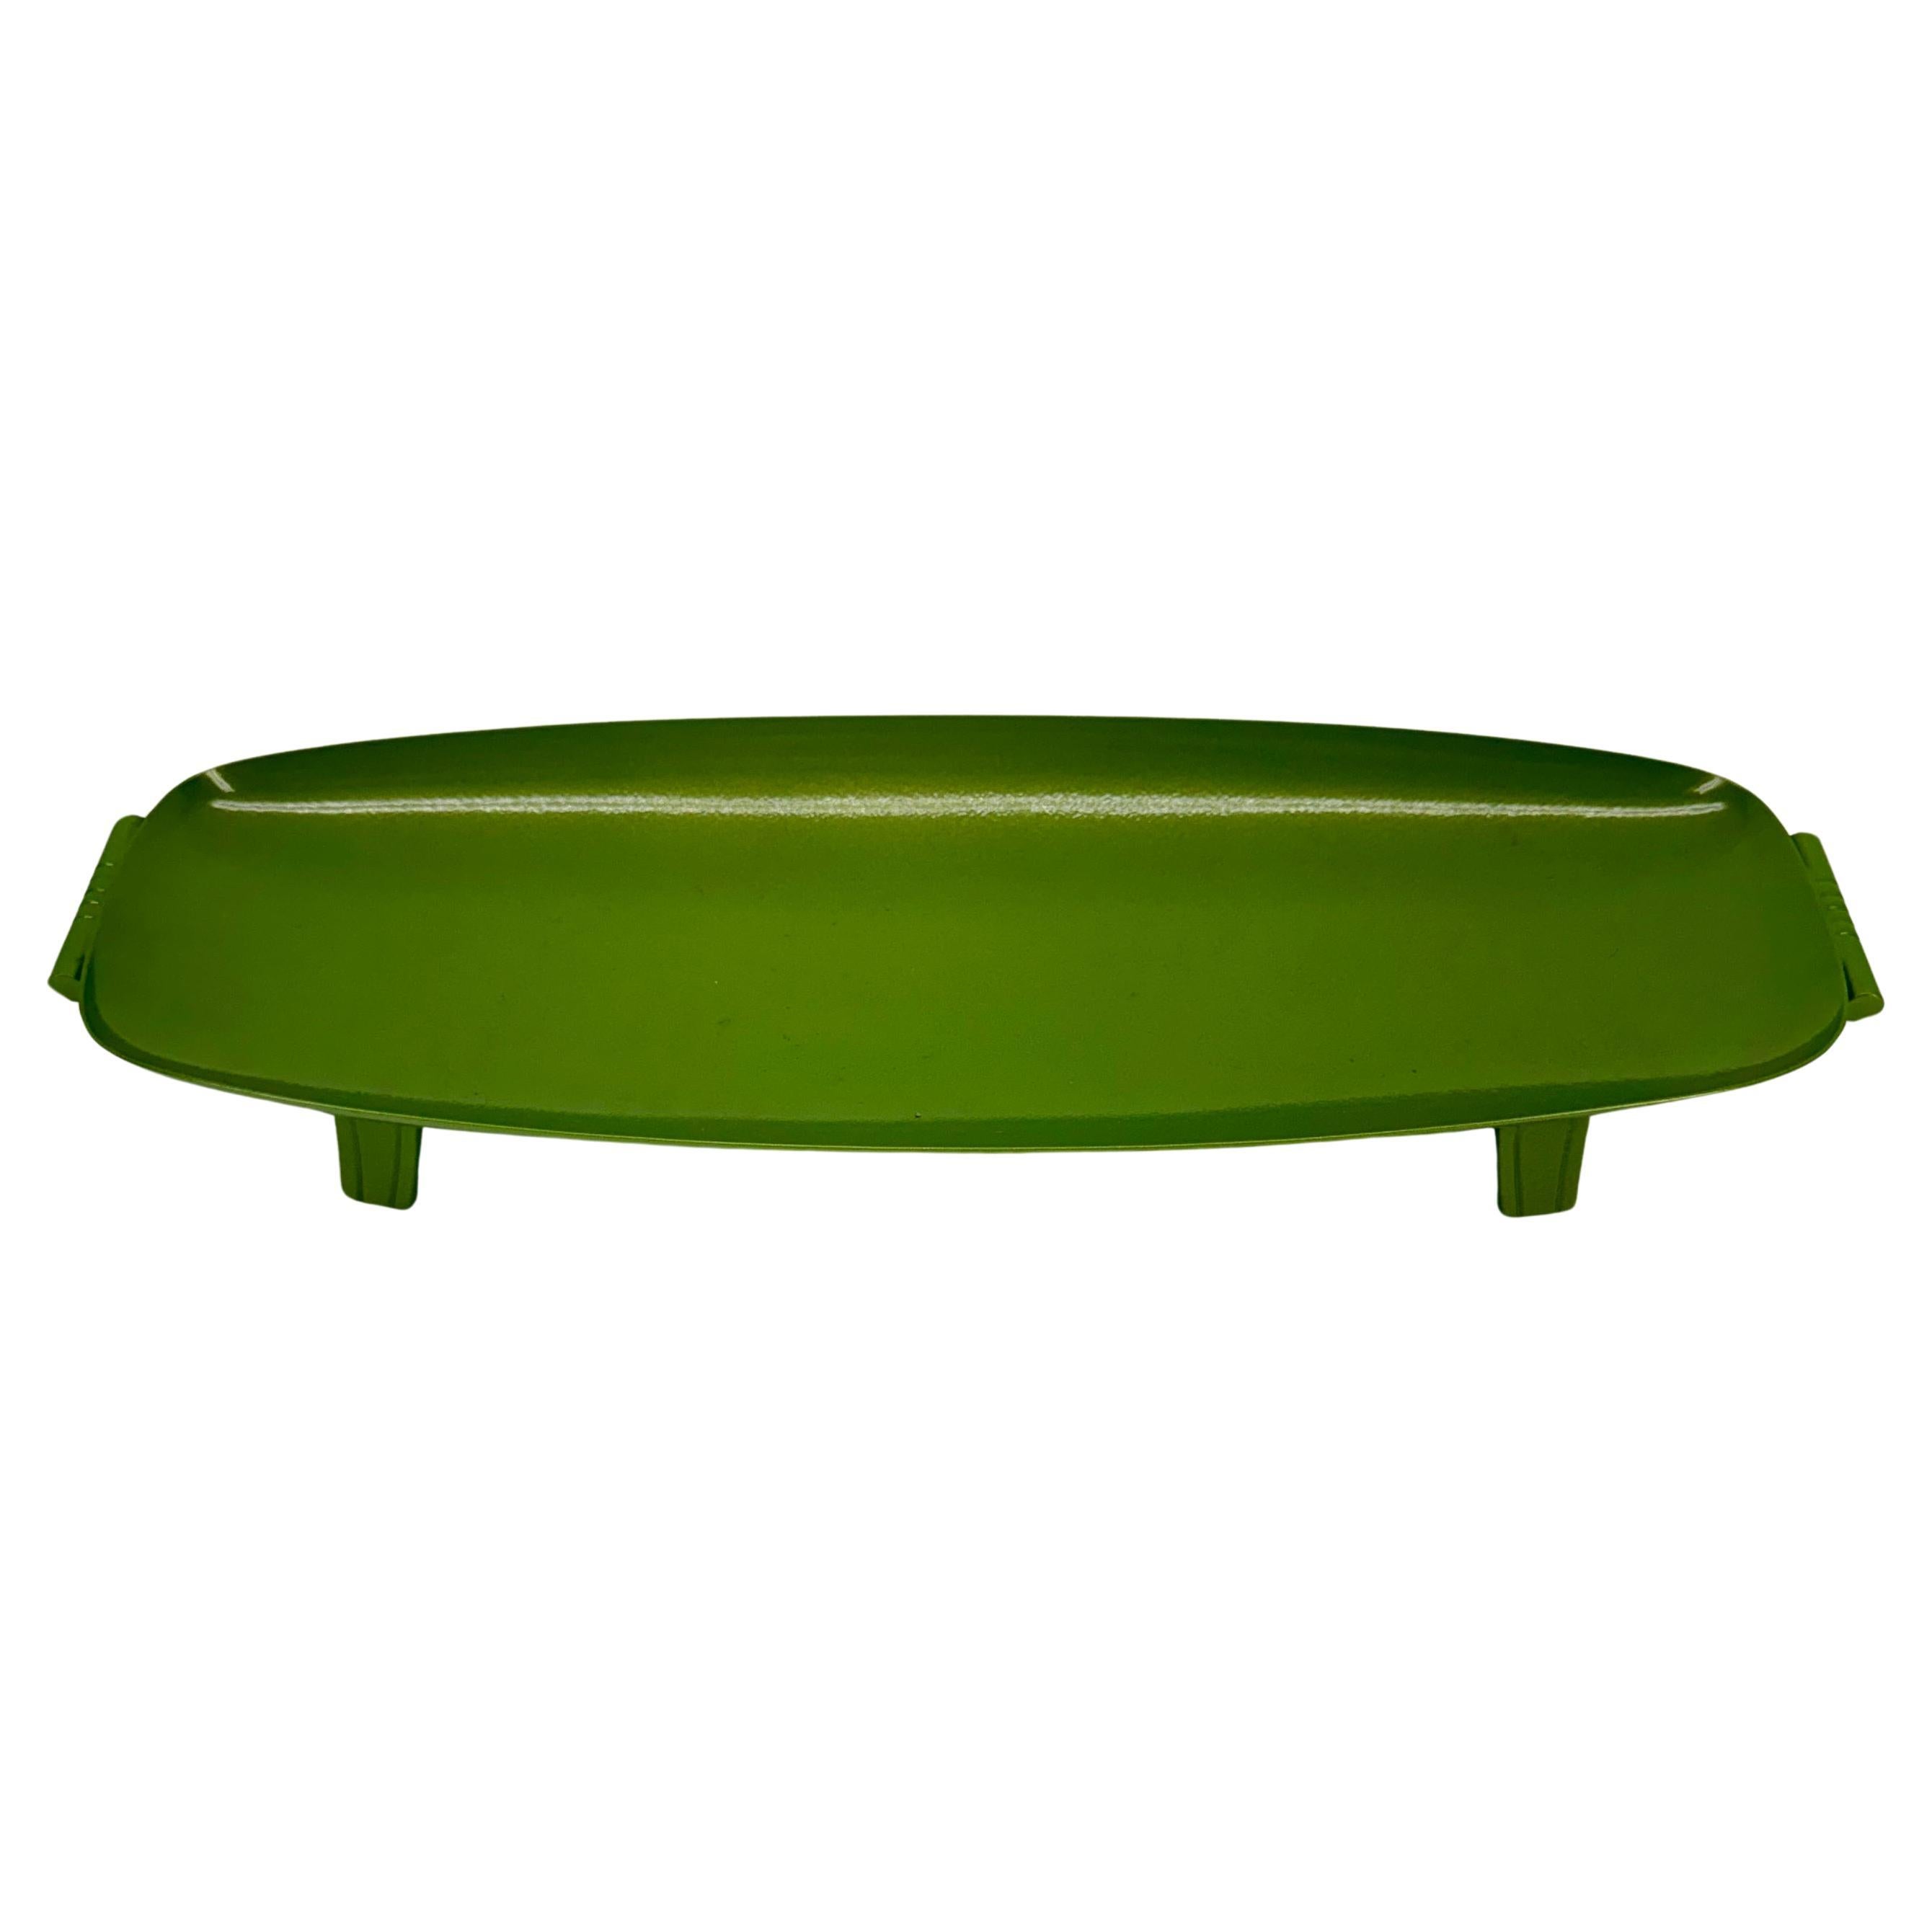 Mid-Century Modern Powder-Coated Leafy Green Metal Tray or Dish For Sale